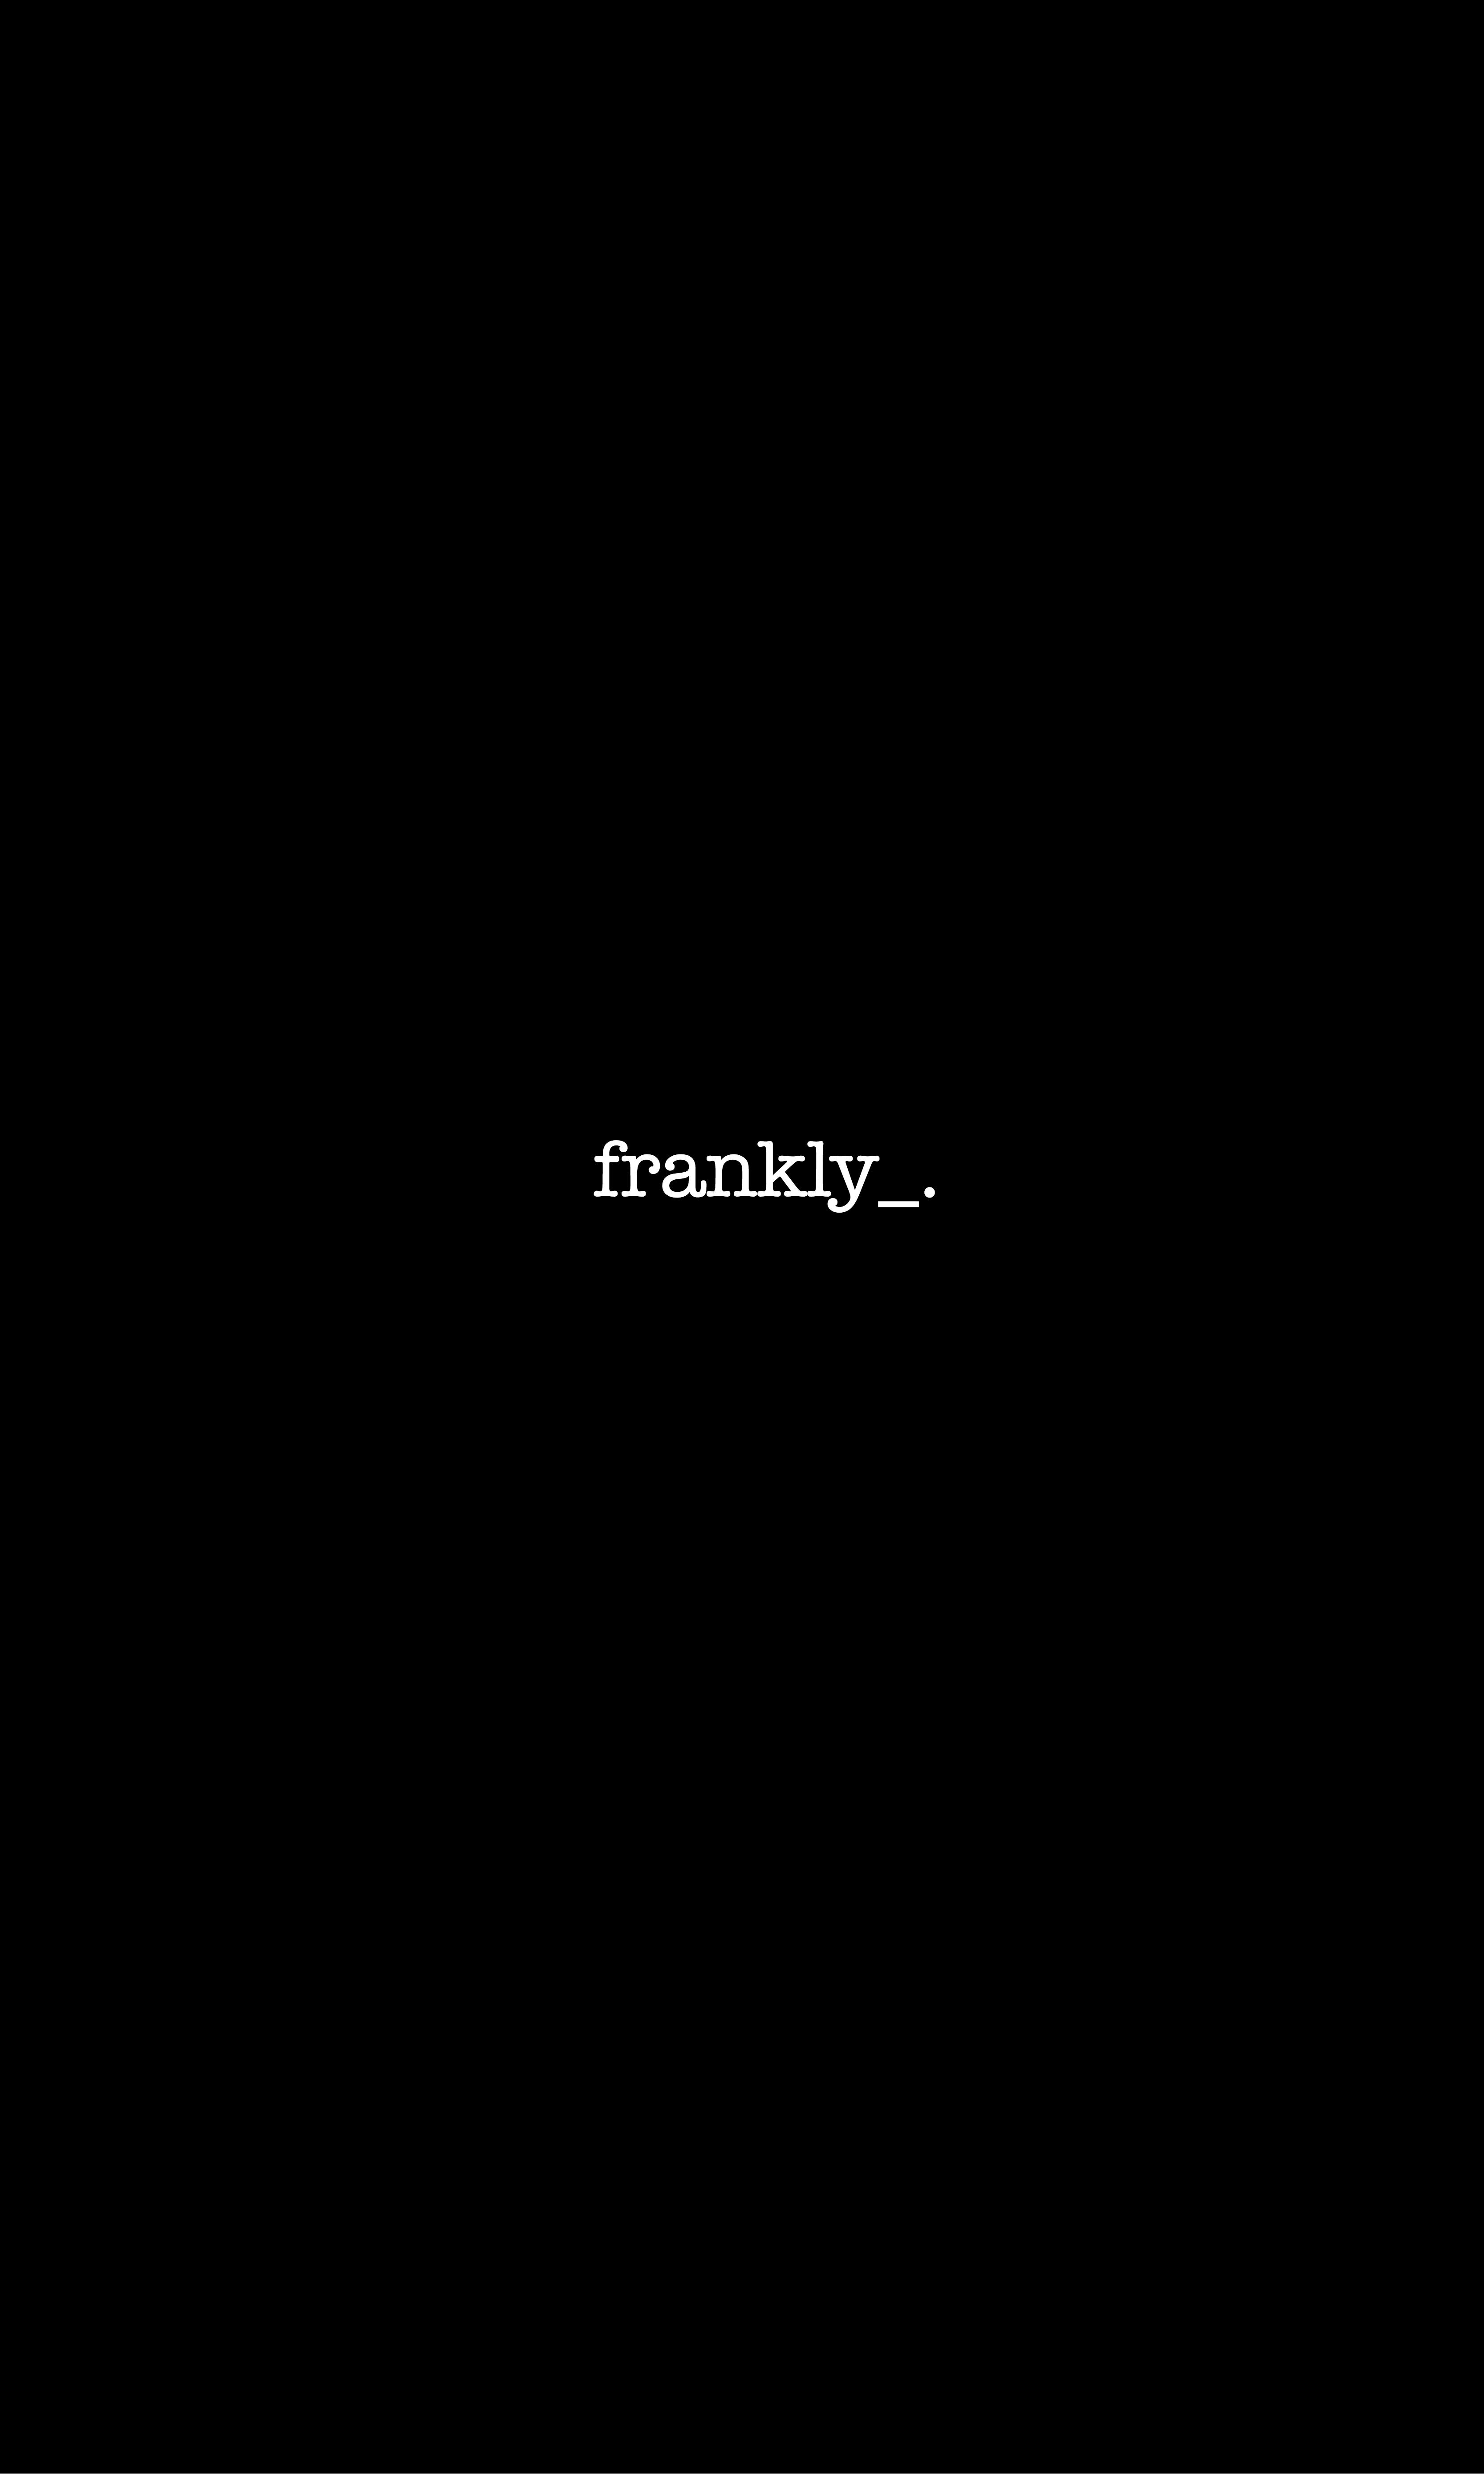 Frankly (2020)